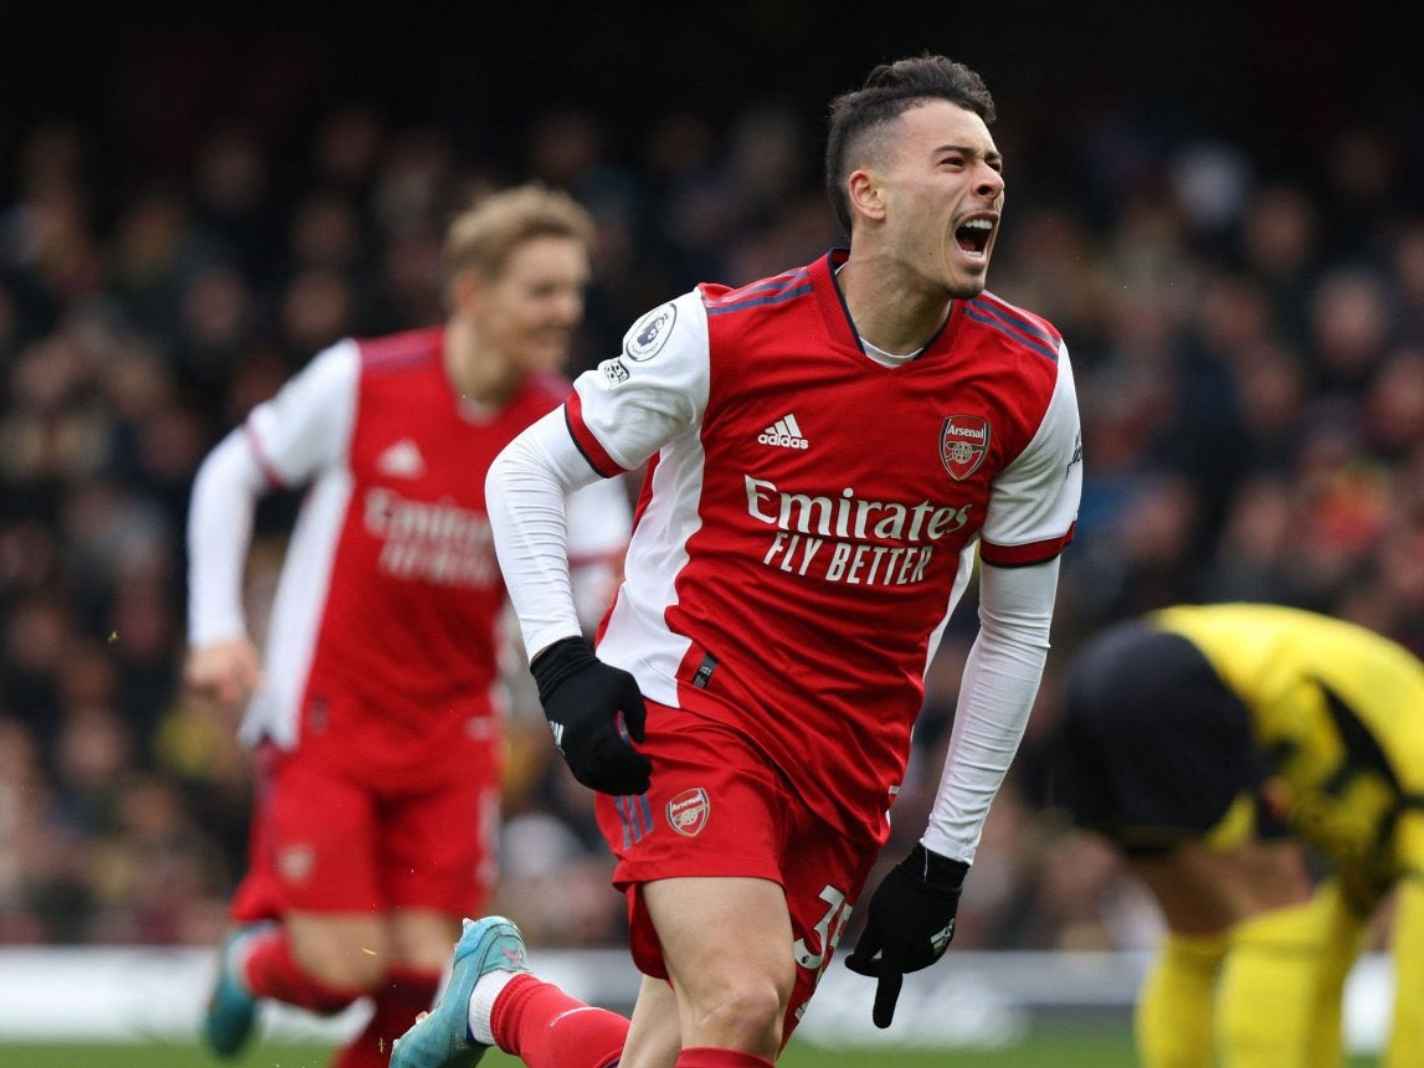 Football fans can't wrap their heads around why Arsenal wore red shorts against Watford